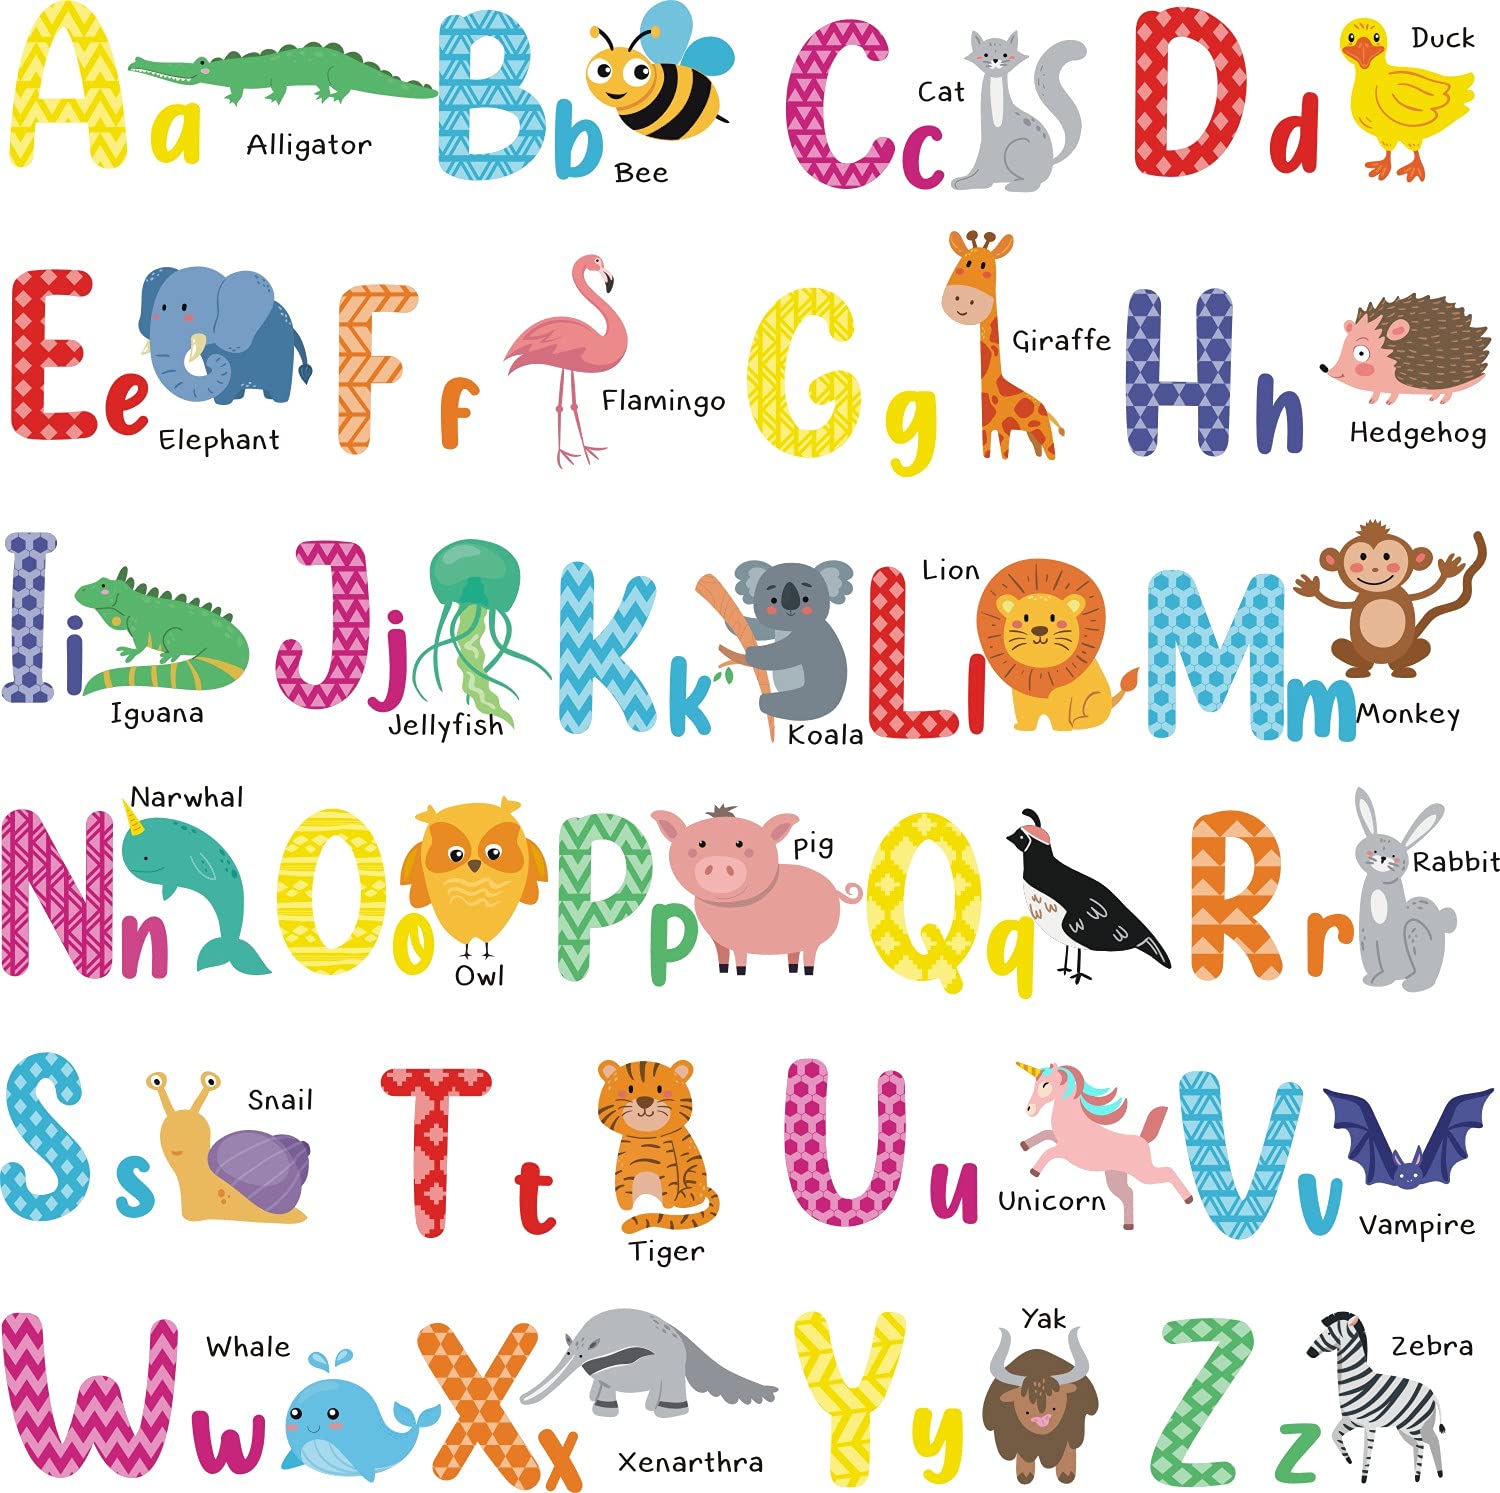 Colorful Alphabet Wall Stickers, Animals ABC Wall Art Decals, Watercolor Educational ABC Alphabet Wall Art Stickers for Kids Boys Girls Room Nursery Bedroom Living Room Art murals Decorations